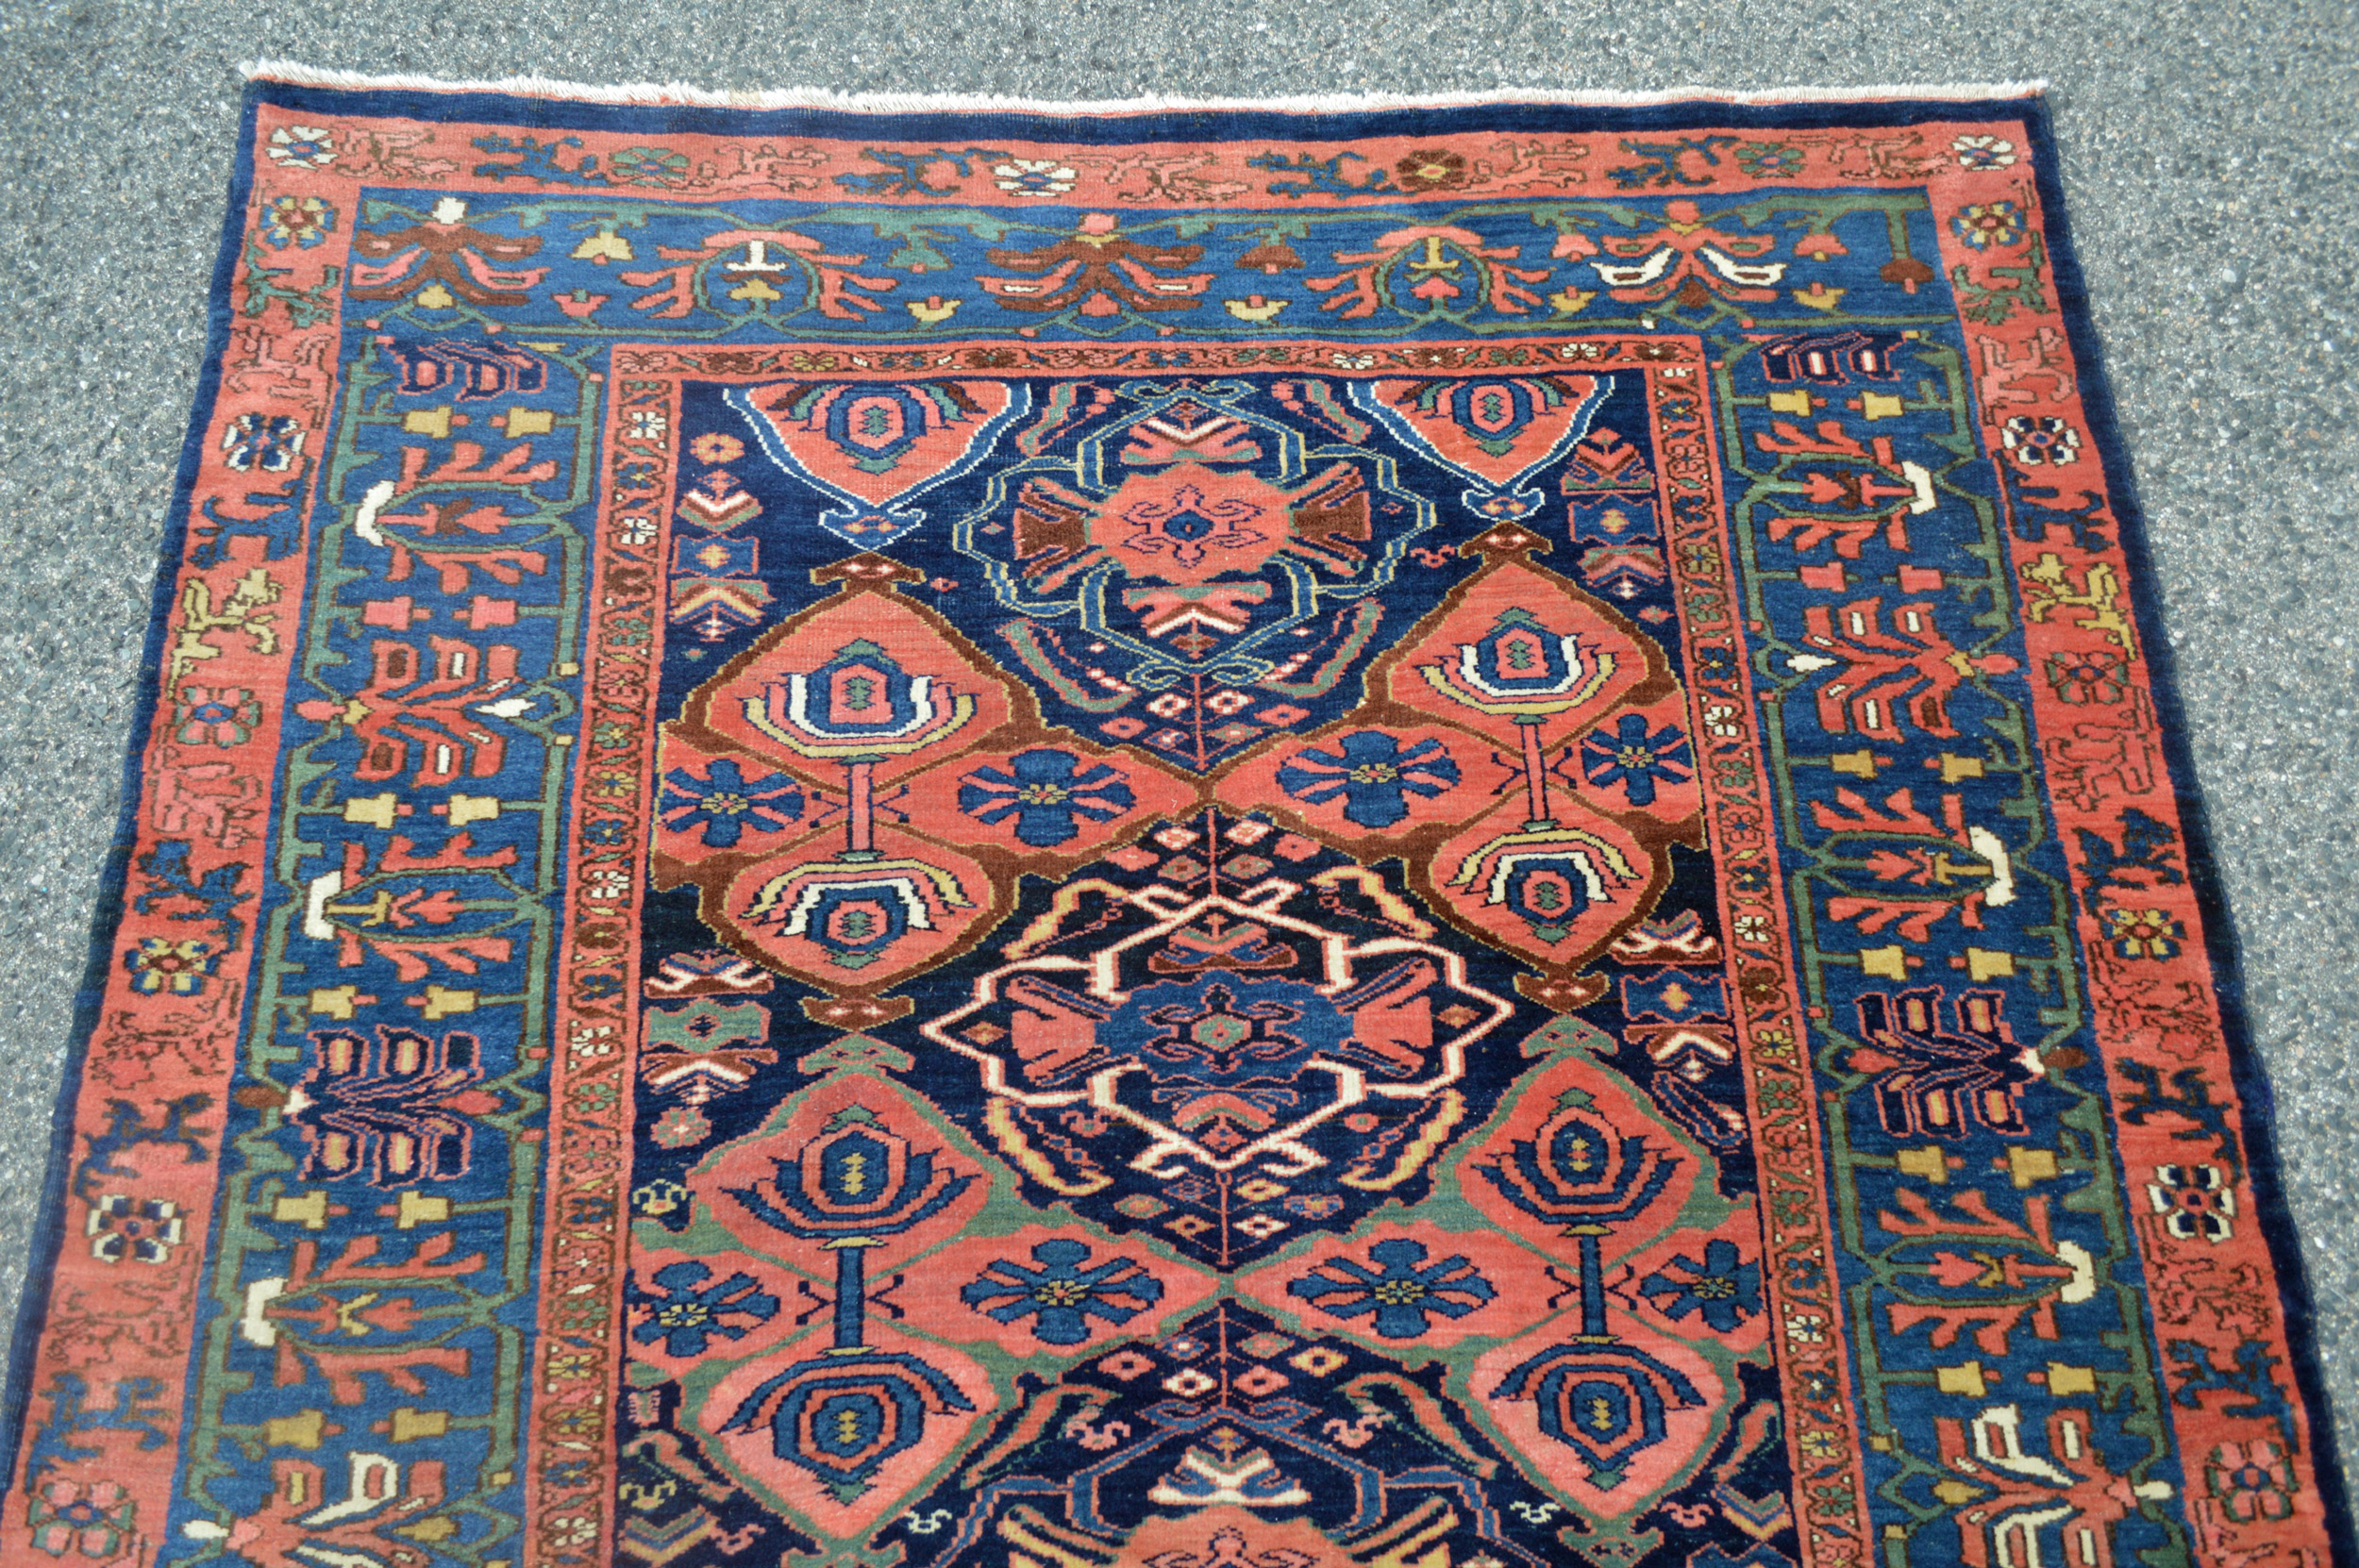 Detail of an antique Persian Bidjar rug with a Quatrefoil design on a navy blue field that is framed by a mid blue, floral border, Douglas Stock Gallery, antique Oriental rugs Boston,MA area New England, antique rugs NYC